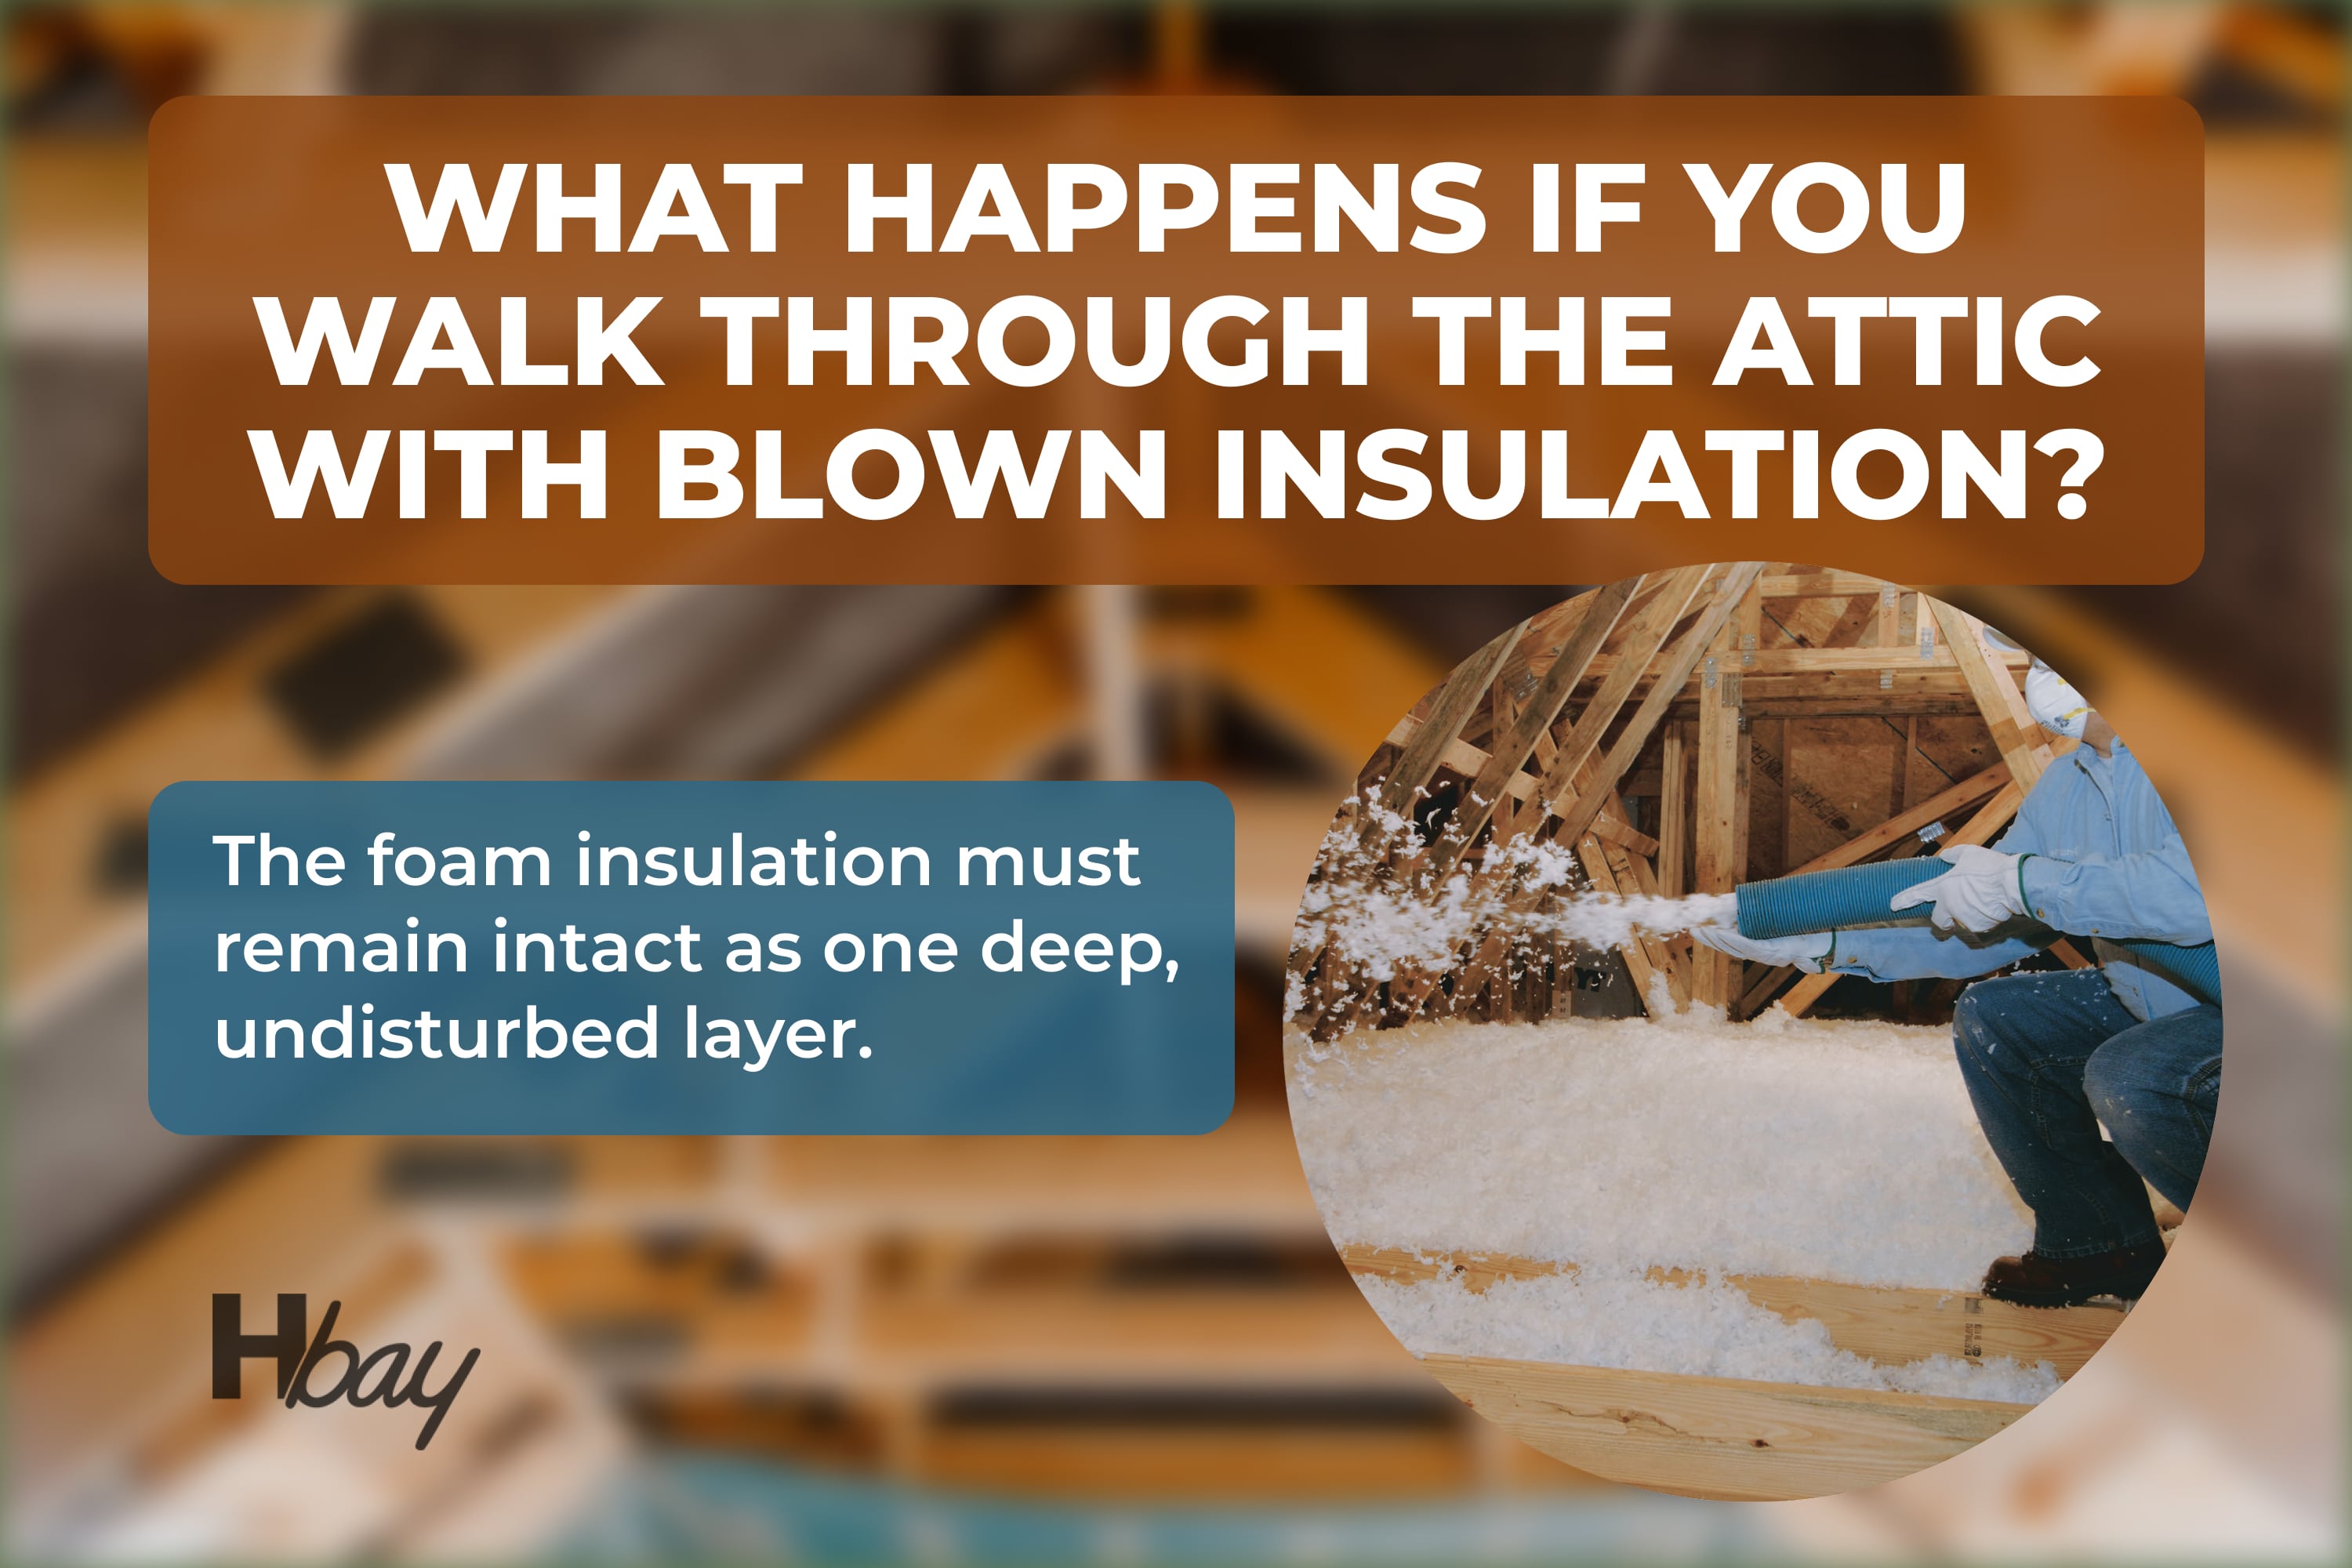 How to Walk in an Attic With Blown Insulation